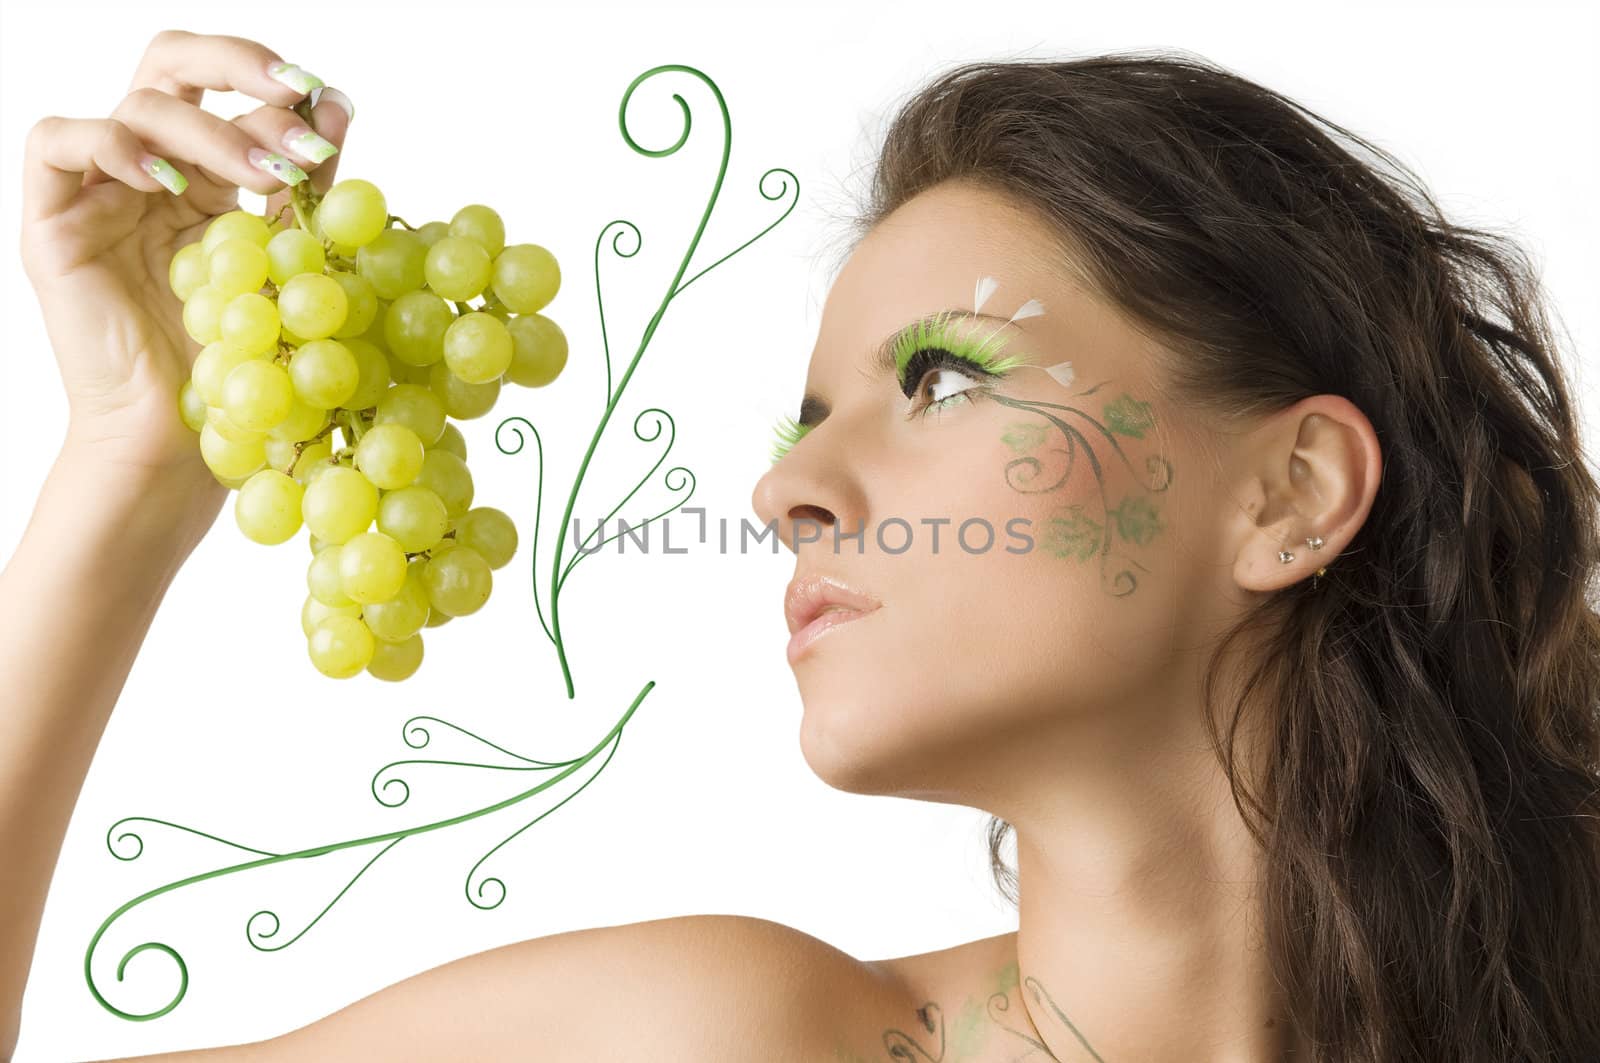 pretty girl with face painted looking at the green grape kept in her hand